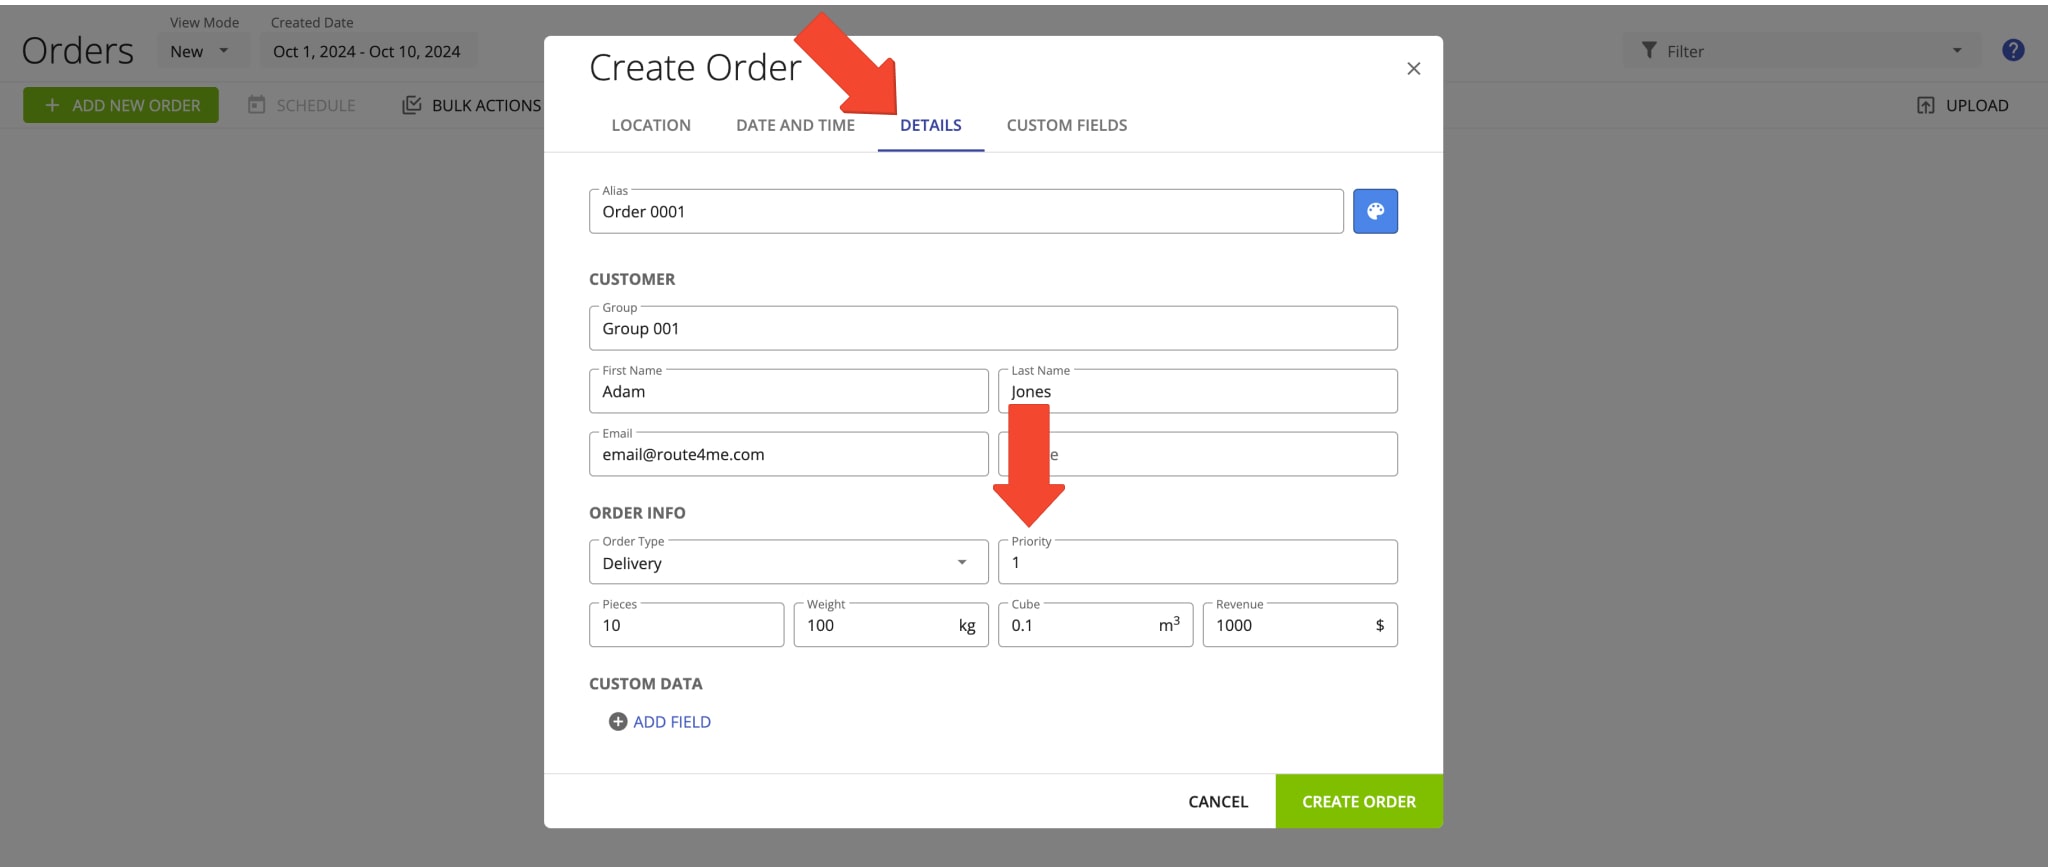 Add priority to orders to plan and optimize last mile routes with prioritized delivery orders and visits.